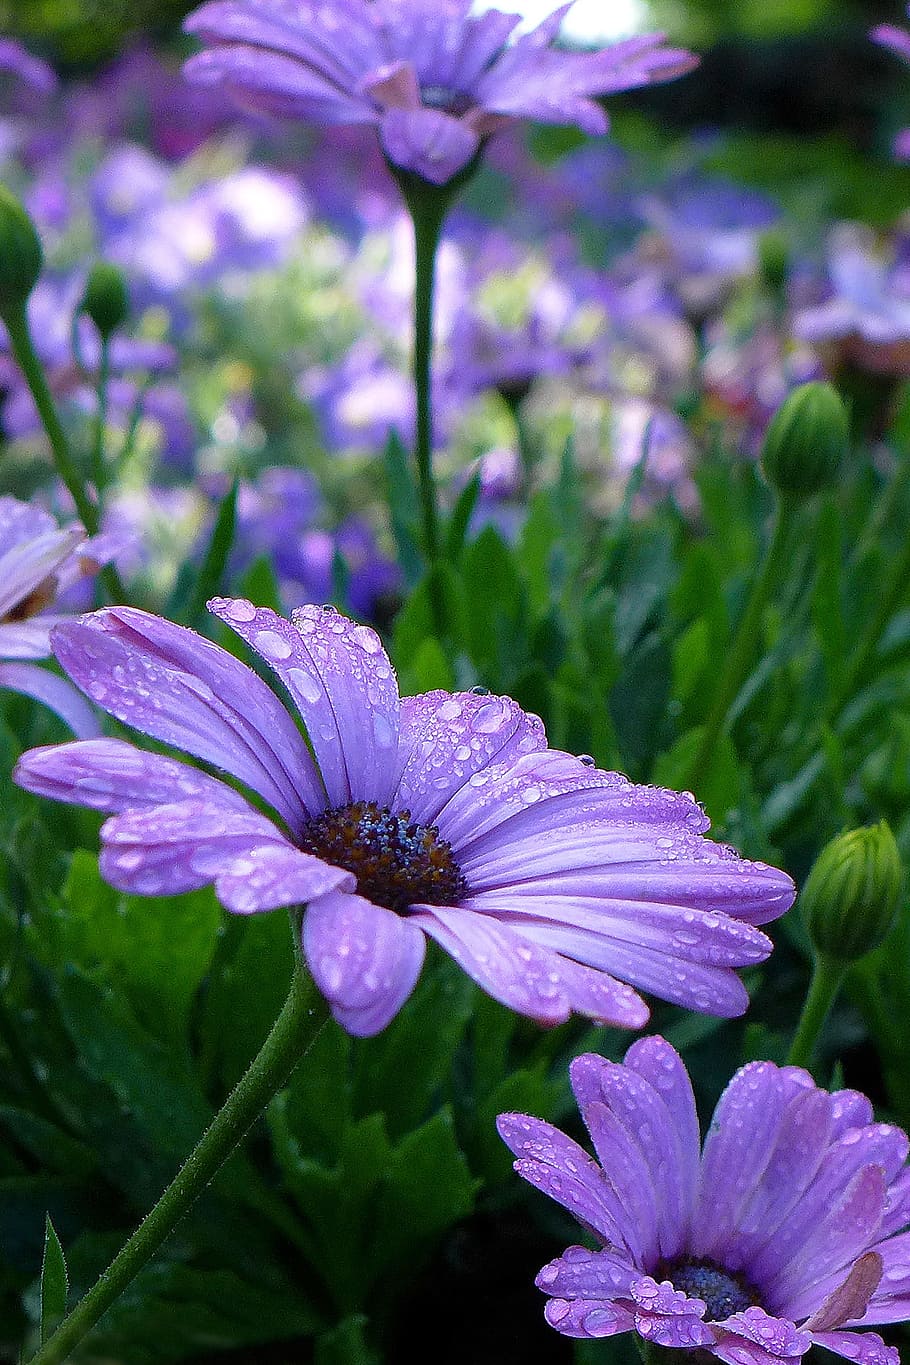 Purple African Daisies - an annual native to South Africa. Also called Blue-eyed Daisy, Cape Daisy, and Osteo.